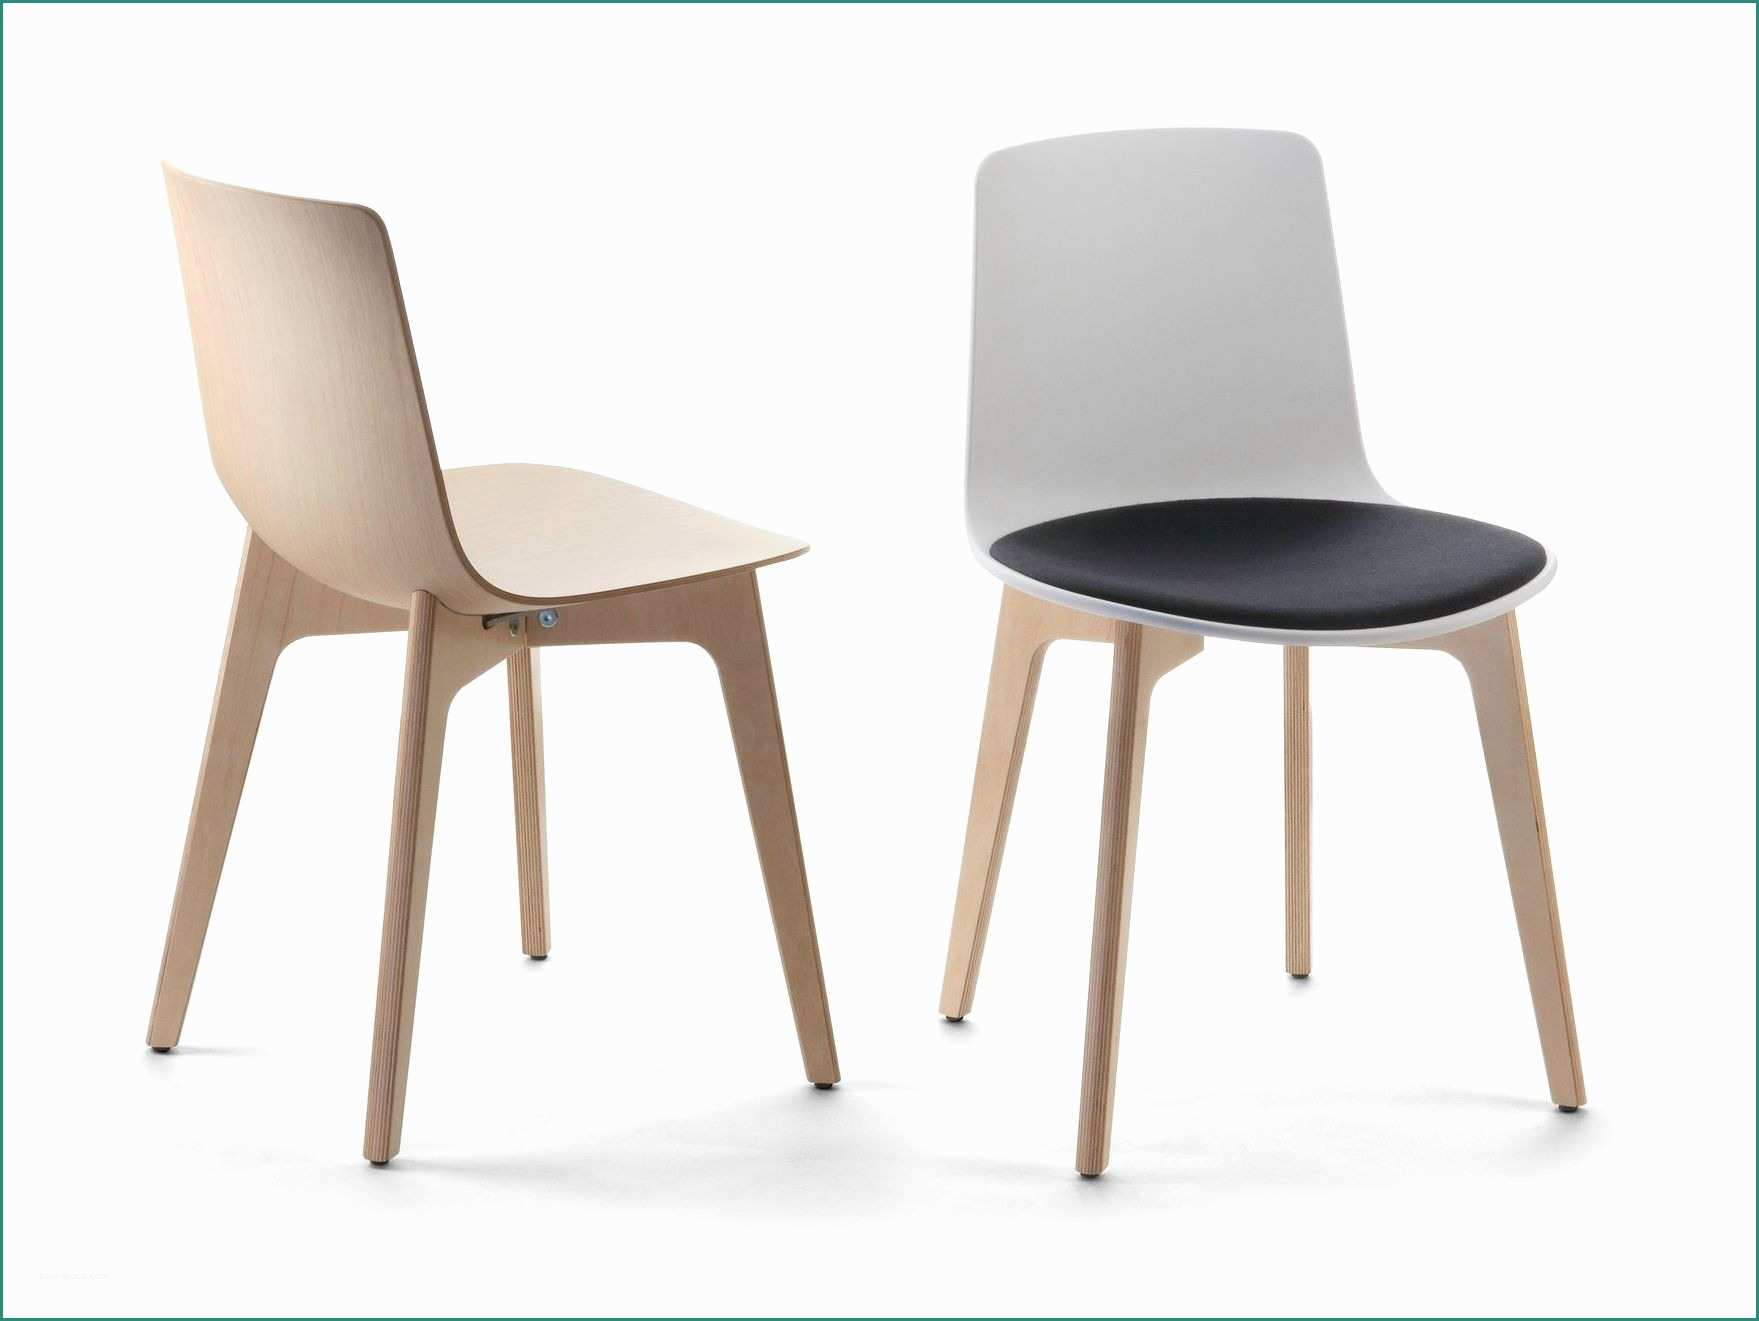 Sedie Kartell Outlet E Lottus Wood Chair by Enea Design Lievore Altherr Molina